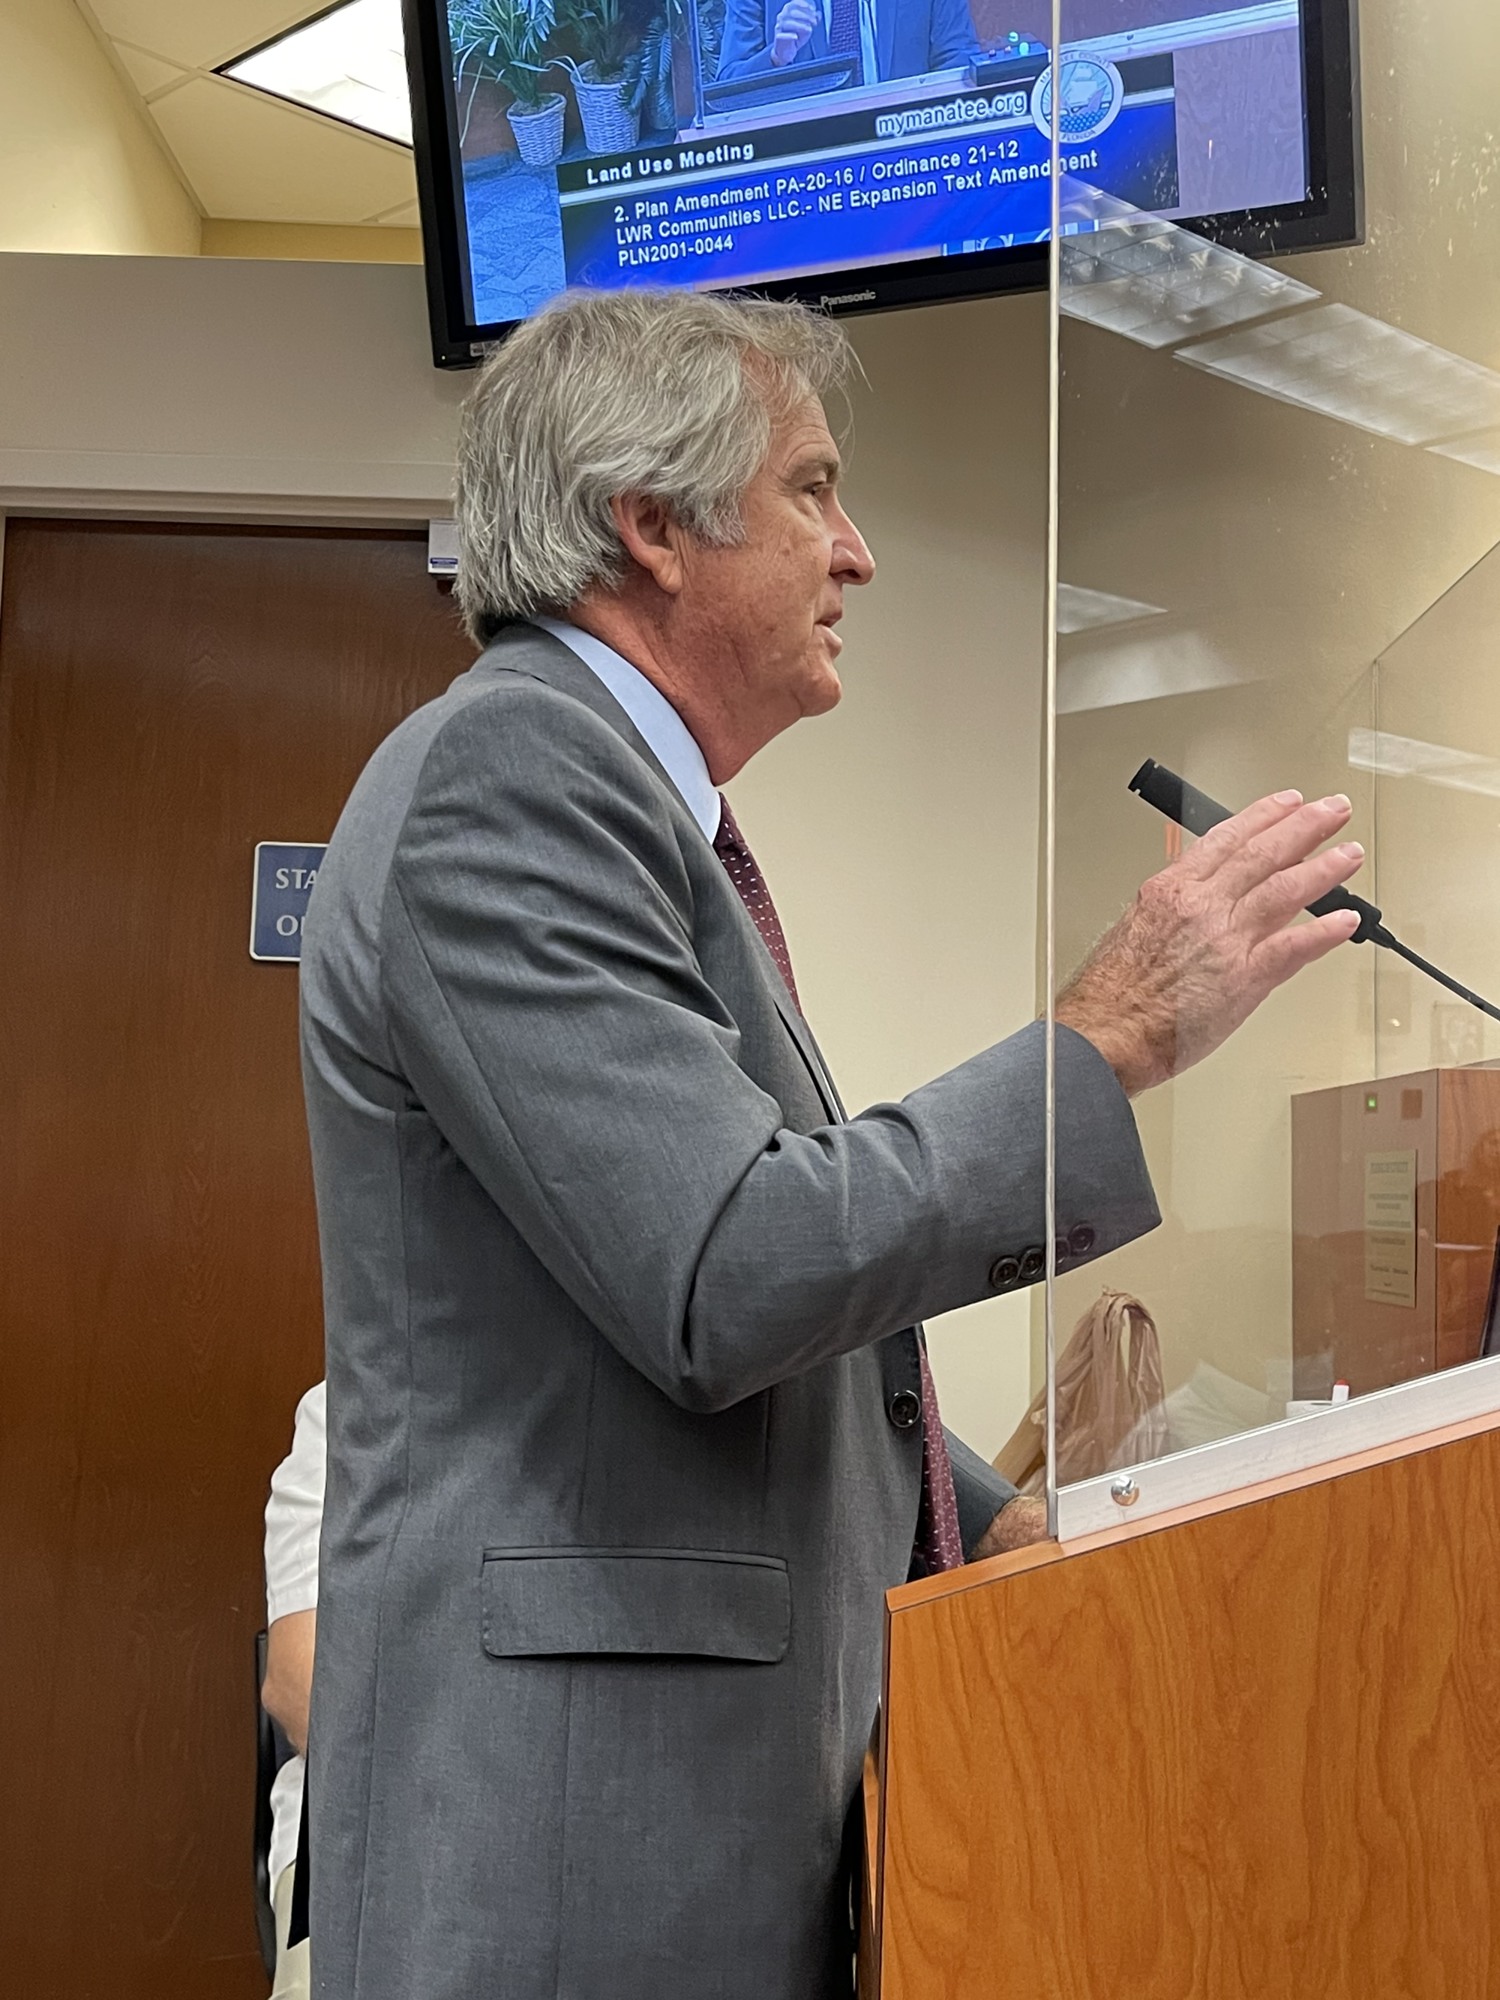 Caleb Grimes, an attorney representing LWR Communities, outlines changes to an amendment that will allow for an expansion in the northeast corner of Lakewood Ranch.